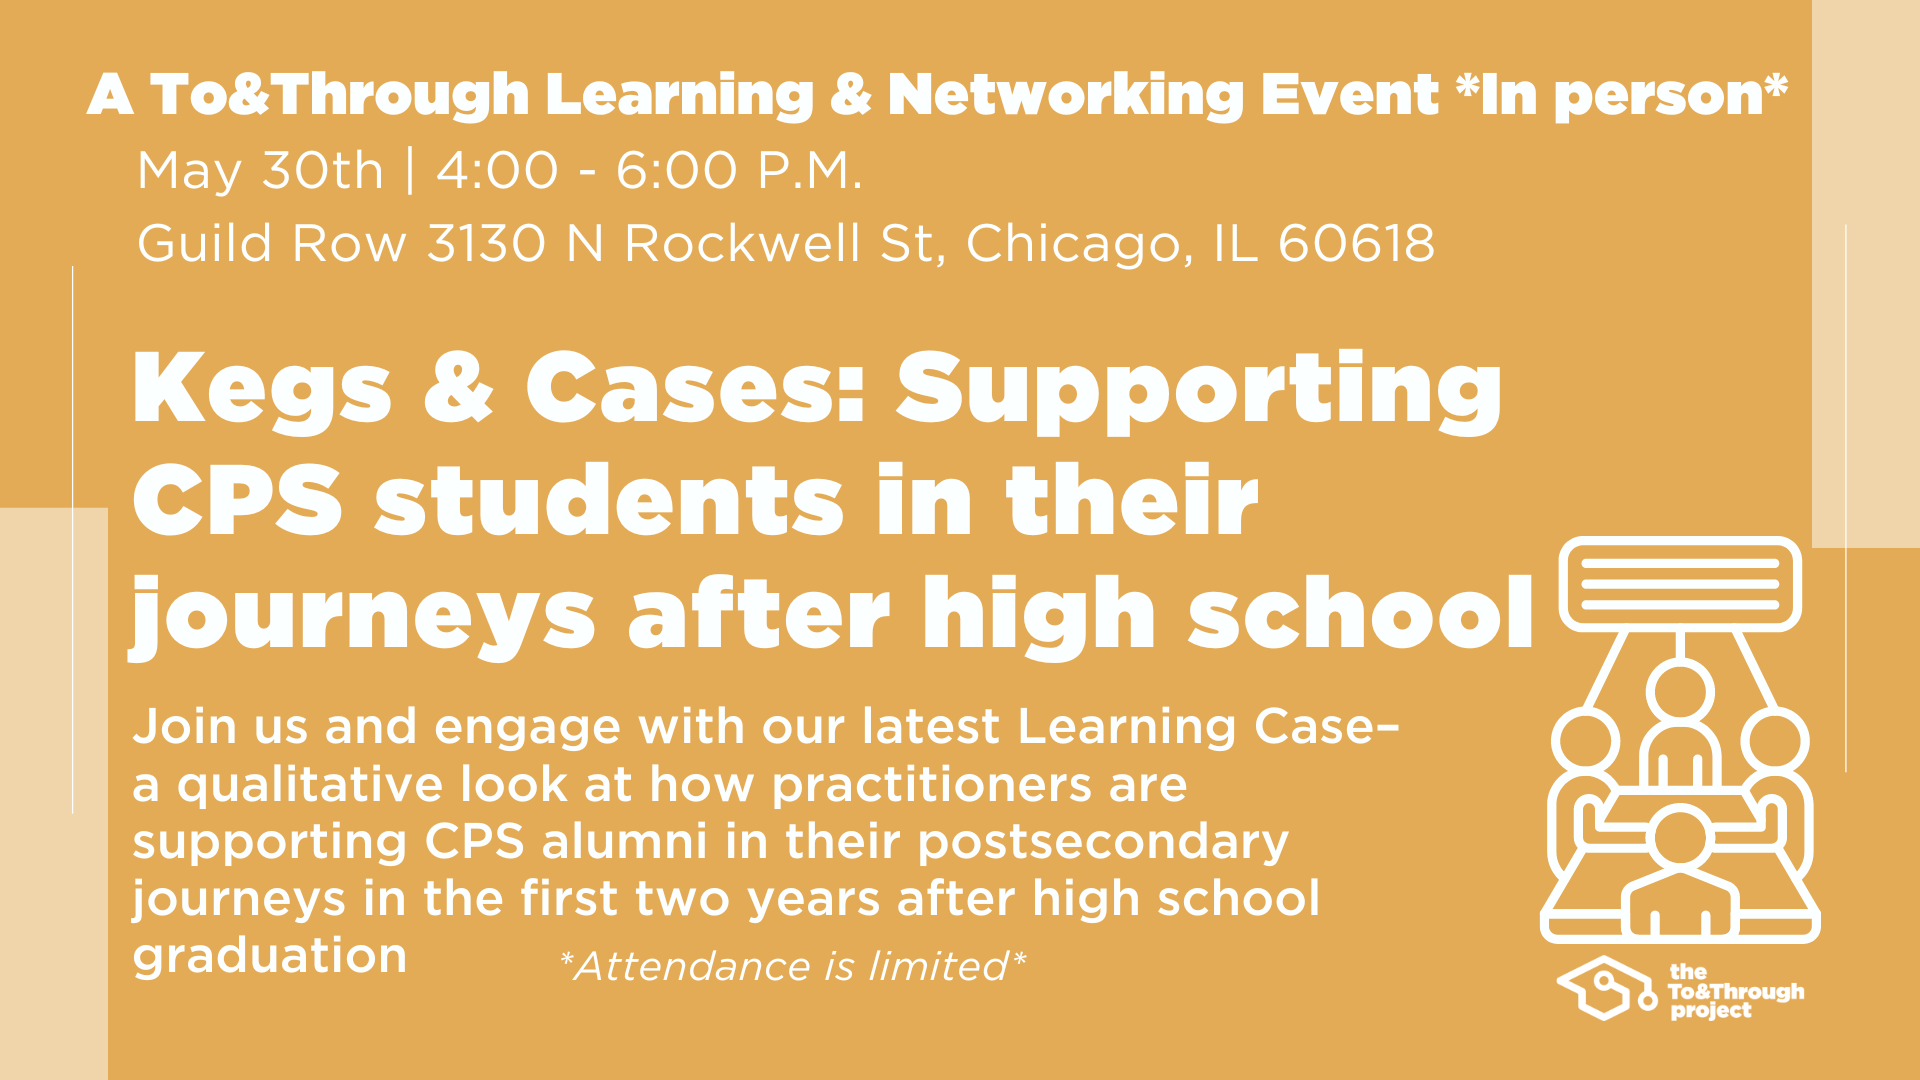 Kegs & Cases: Supporting CPS students in their journeys after high school